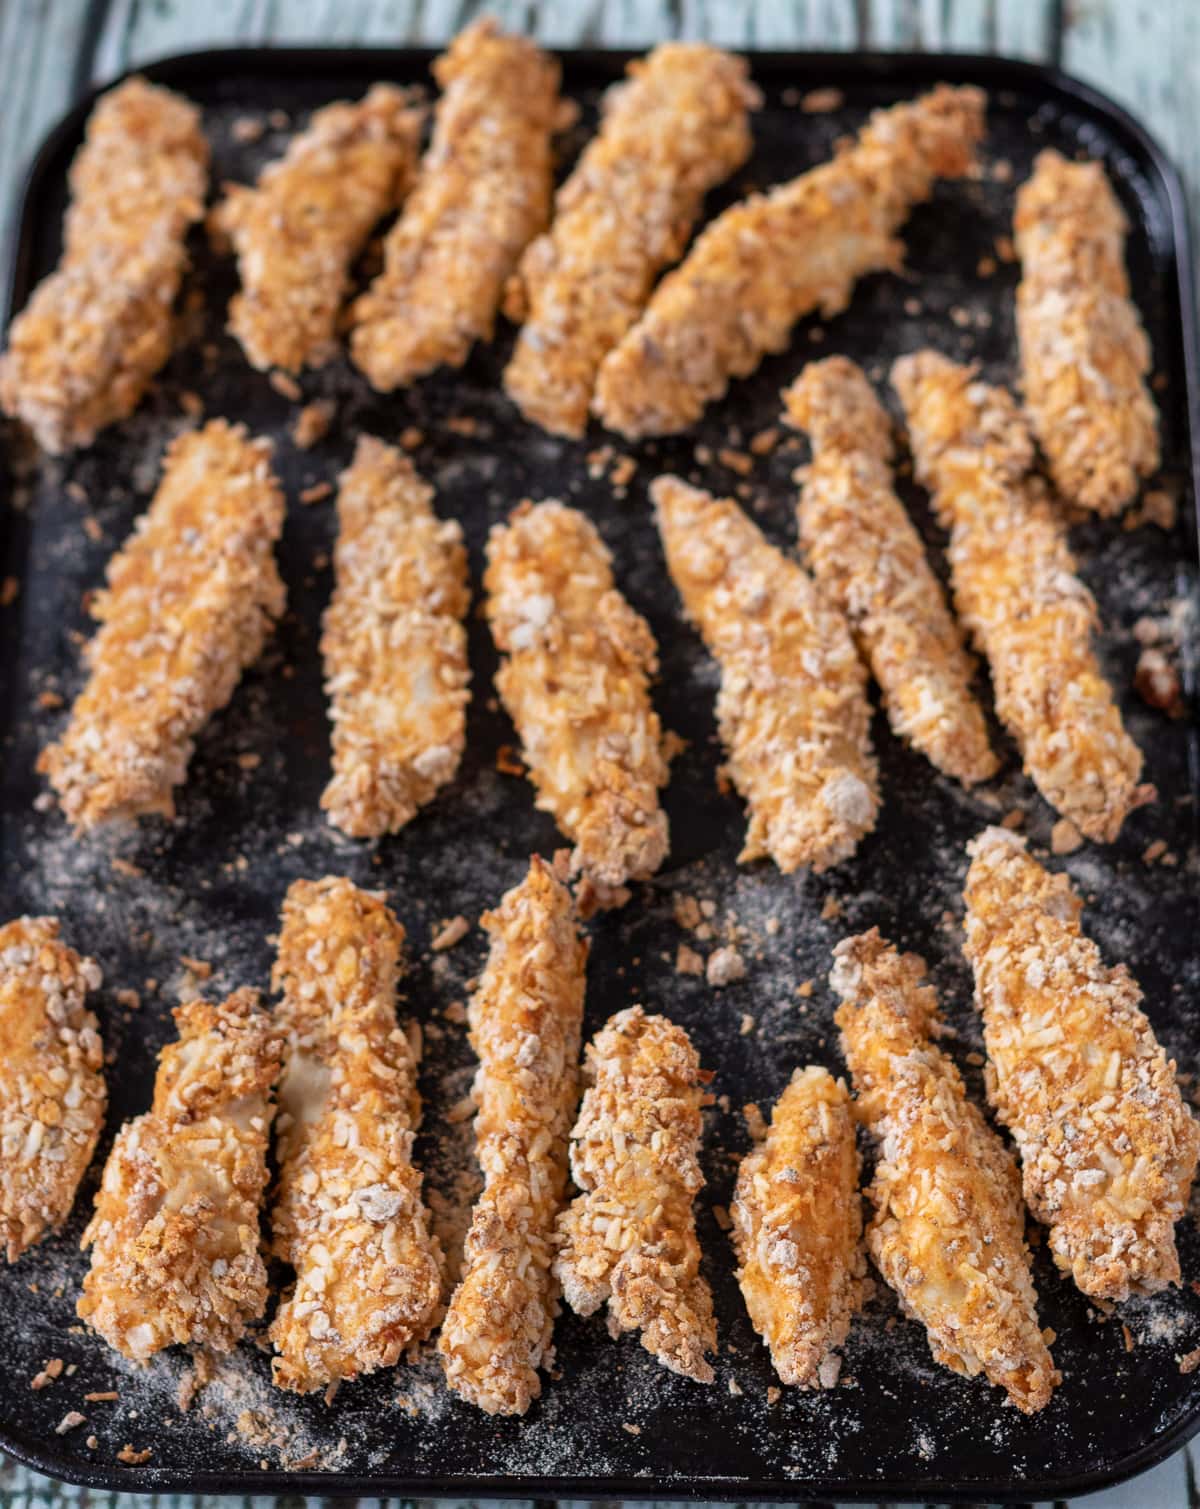 Healthy baked chicken strips on a baking tray cooked and removed from the oven.